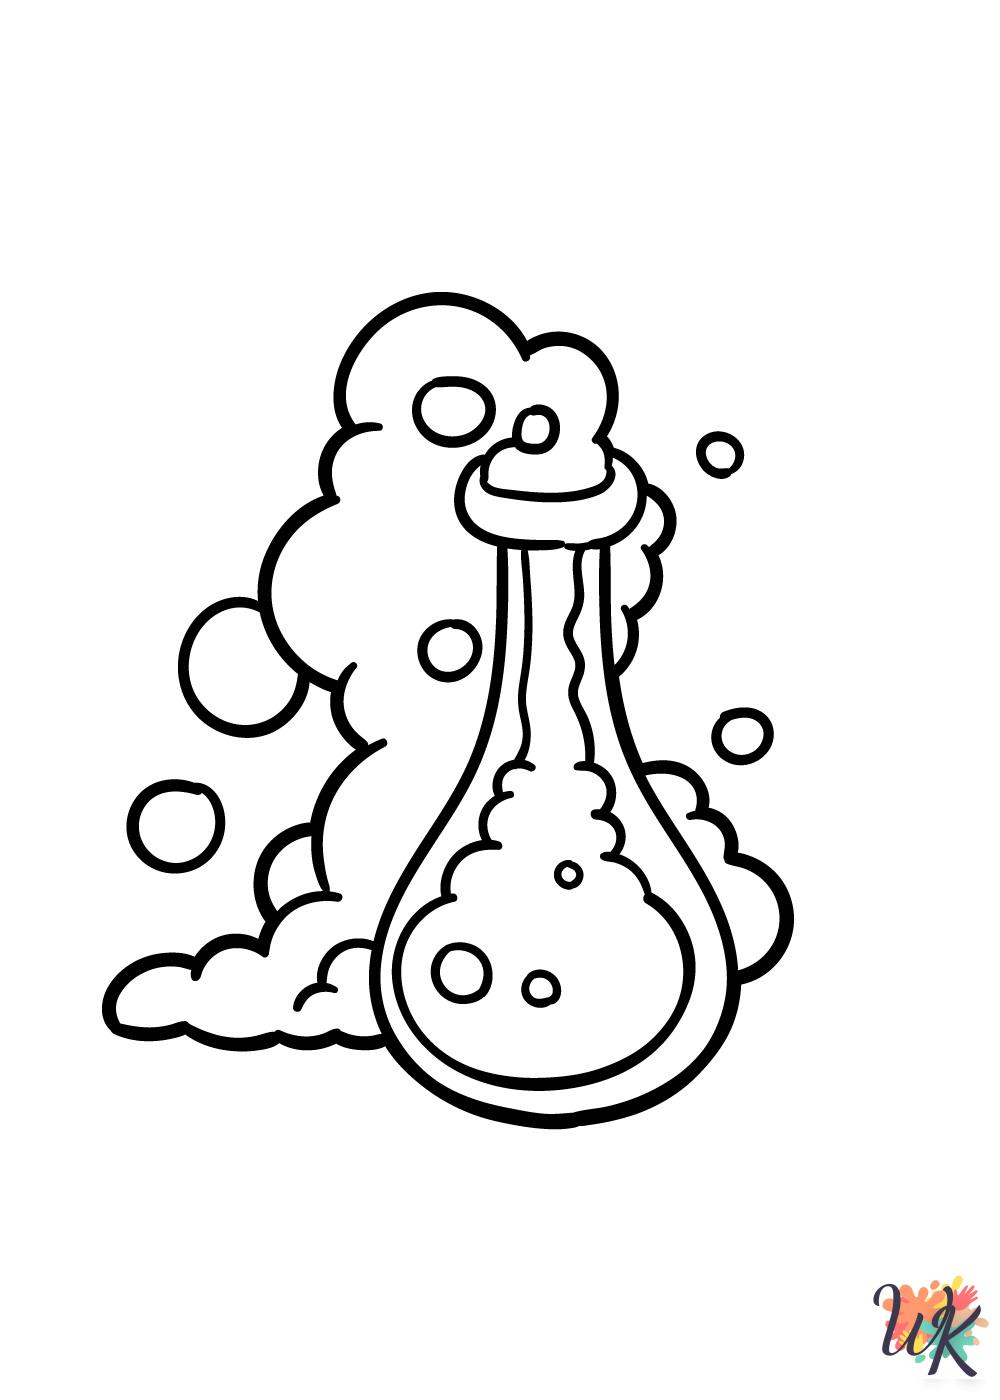 Science coloring book pages